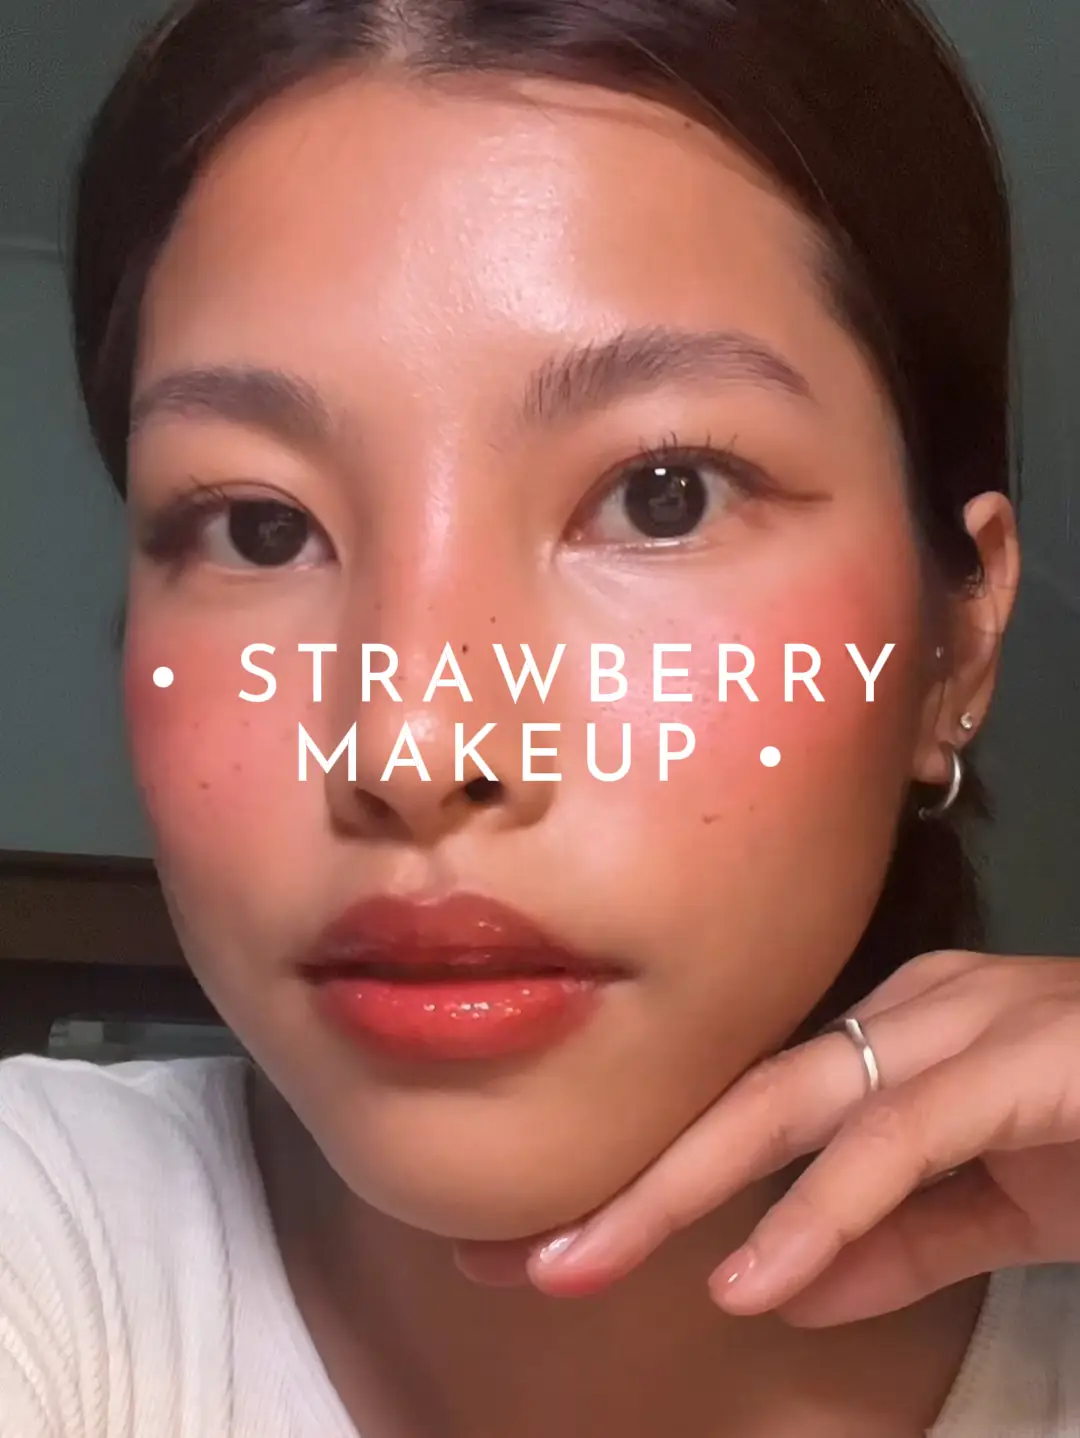 STRAWBERRY GIRL TREND 🍓 💄Model Hailey Bieber posted a video where she  talked about how she does her “strawberry makeup” We decided to k…